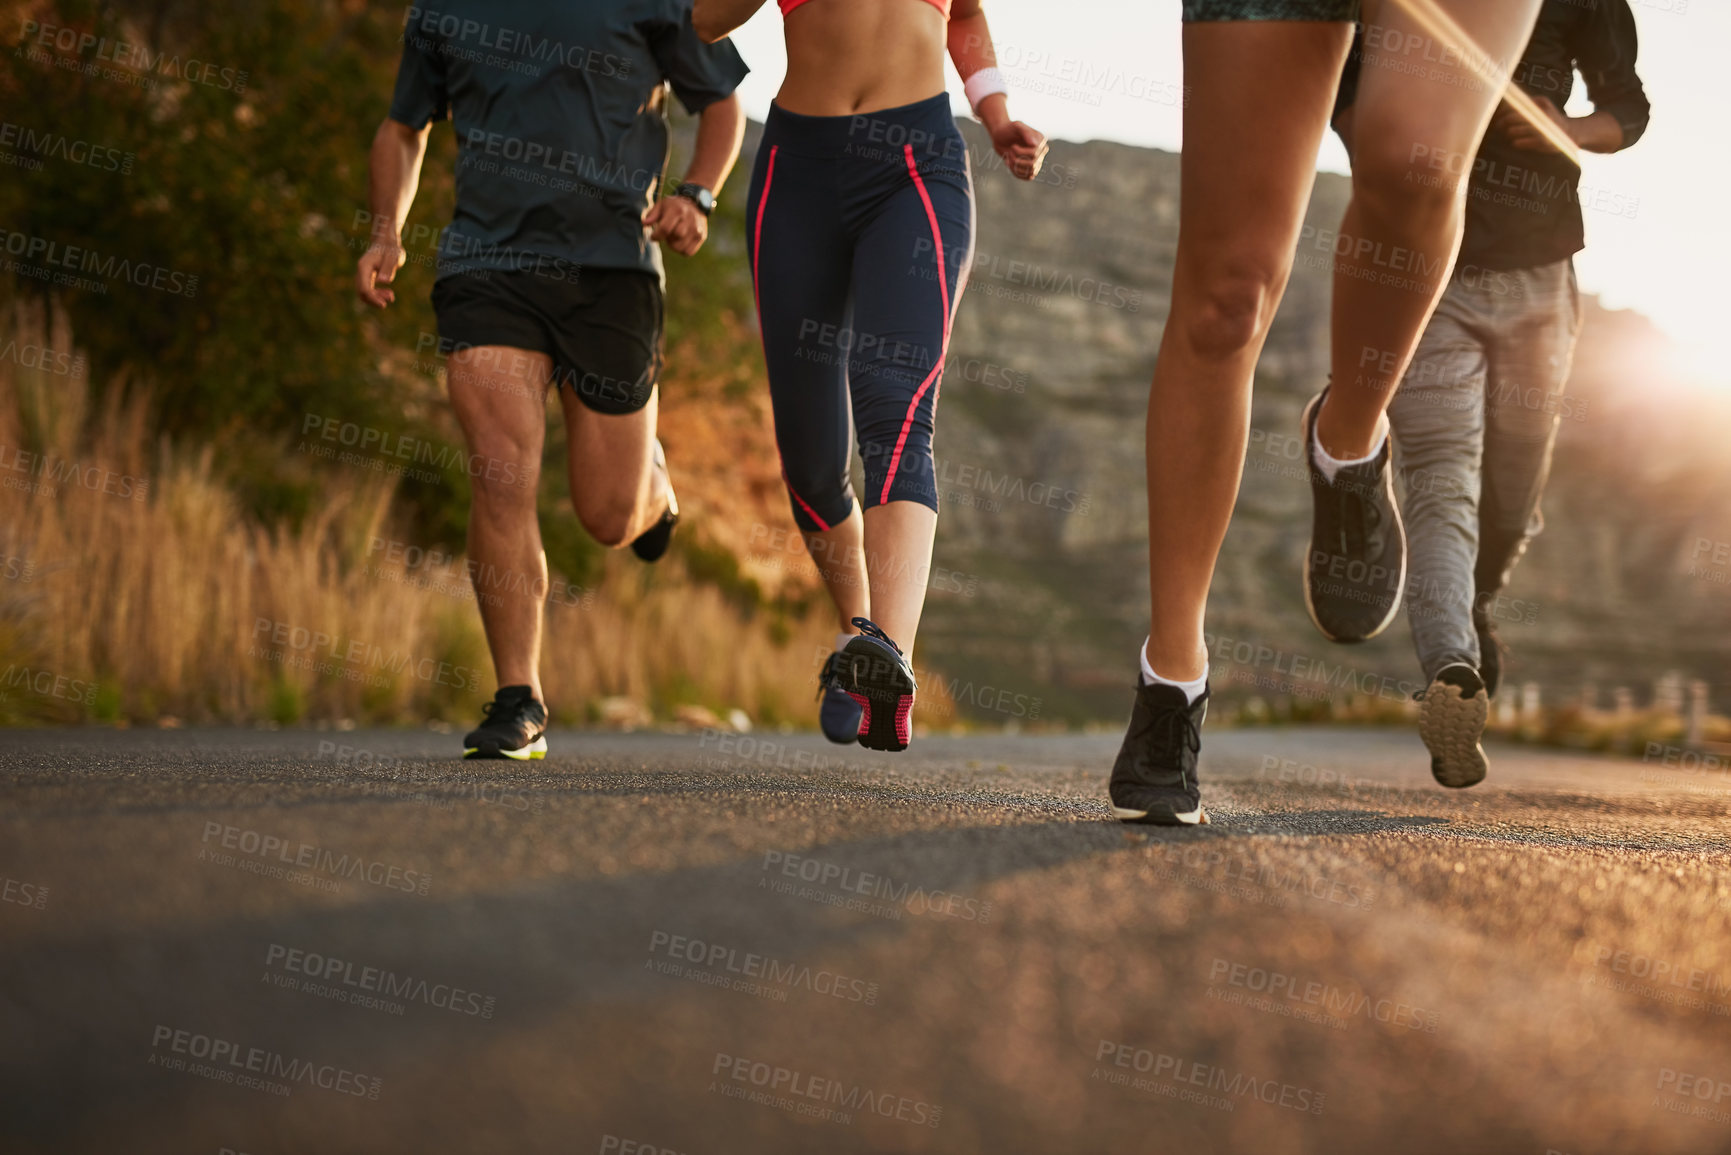 Buy stock photo Shot of a fitness group running along a rural highway